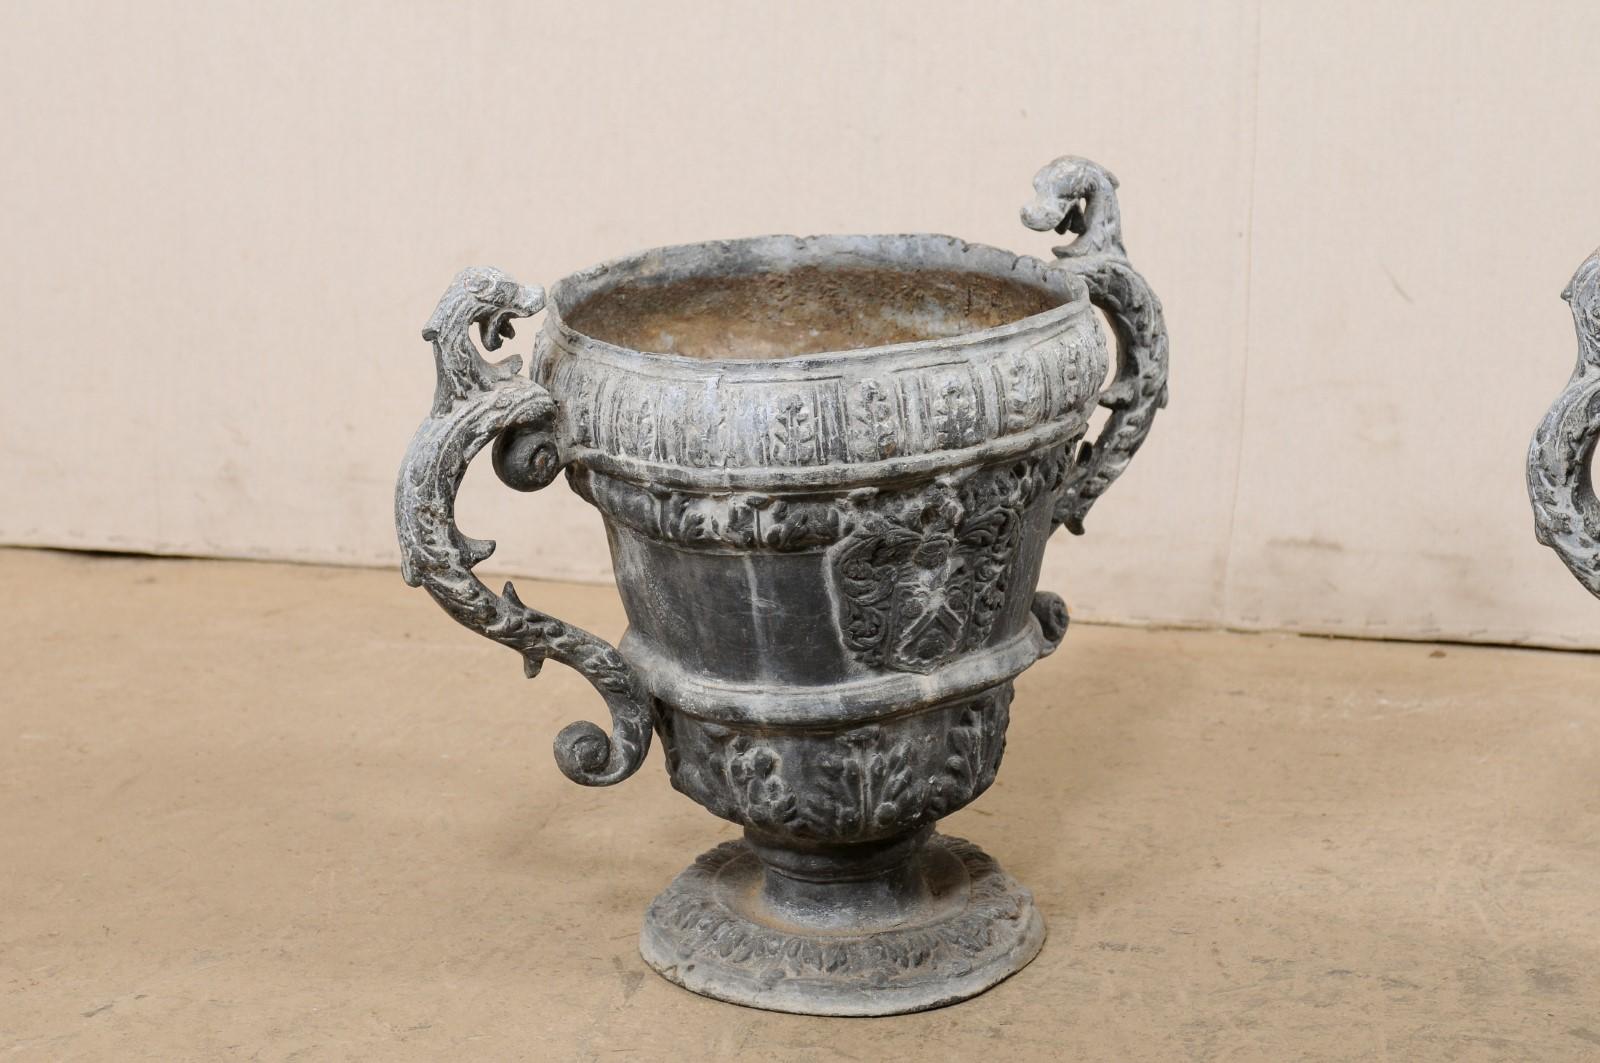 A French pair of decorative urn planters from the 18th century. This antique pair of lead garden ornaments from France stand approximately 16 inches in height, each featuring an urn raised on a rounded pedestal, leaf motif decor, and s-scroll